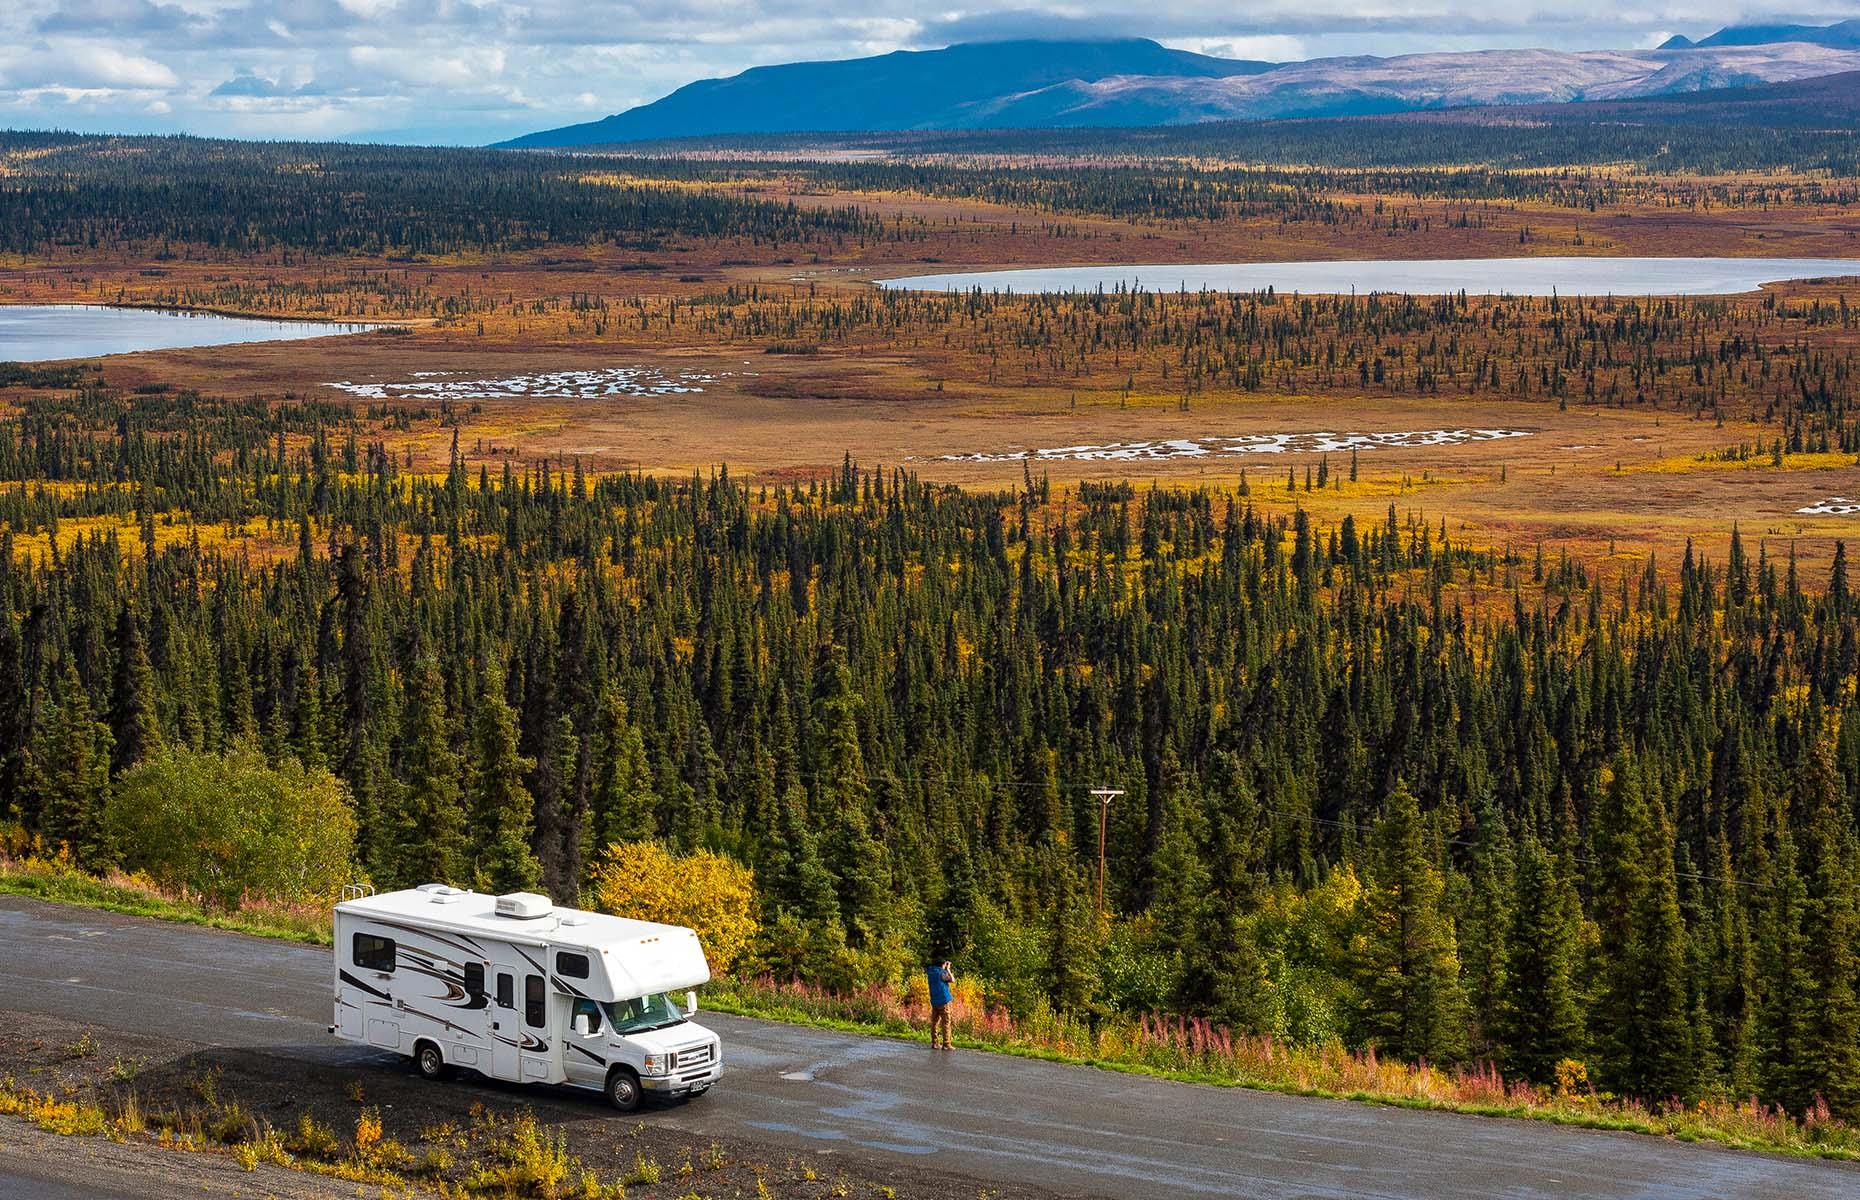 <p>As the world of travel continues to bounce back from the pandemic, the RV is keeping its wheels firmly on the road. With more remote workers than ever before, the motorhome is no longer just a vacation rental, but a way of life for many. The world's first all-electric RV <a href="https://archive.curbed.com/2019/9/17/20870863/electric-rv-for-sale-camper-motorhome-iridium-dusseldorf">debuted in Europe in 2019</a> too, and American motorhome giant Winnebago <a href="https://robbreport.com/motors/cars/winnebago-all-electric-e-rv-camper-van-debut-1234659042/">unveiled its own prototype</a> in January 2022, so the wheels of change are turning.</p>  <p><strong><a href="https://www.loveexploring.com/galleries/111177/new-national-scenic-byways-to-explore-this-summer">Check out America's amazing National Scenic Byways</a></strong></p>